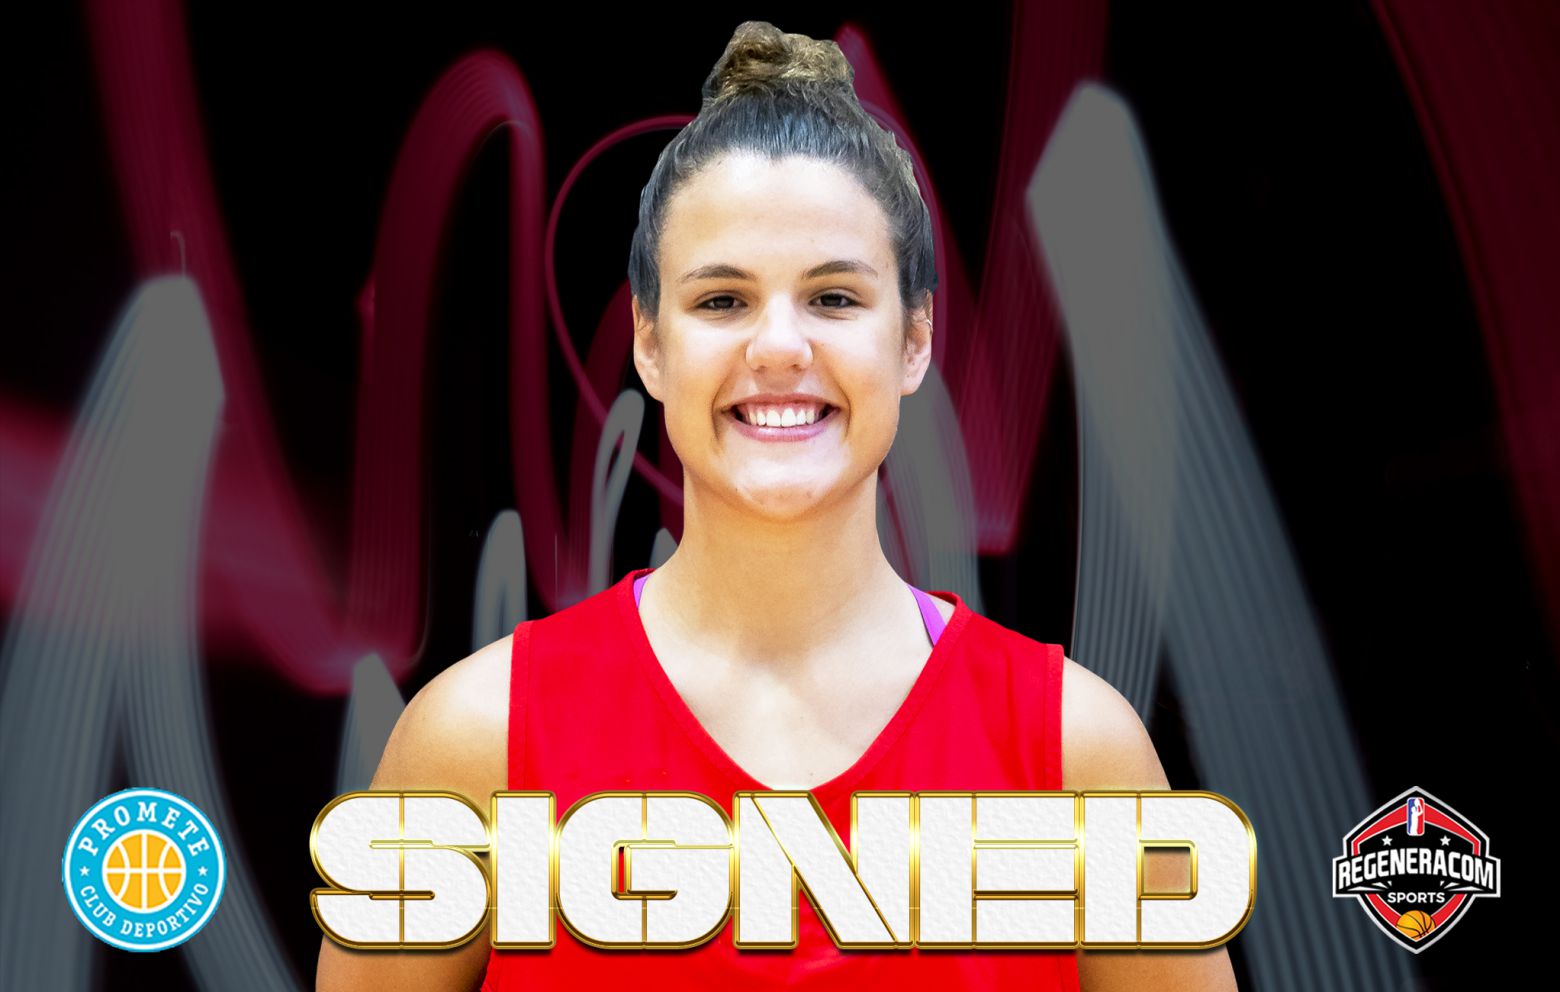 TXELL ALARCÓN has re-signed with Campus Promete for the 2021/22 season